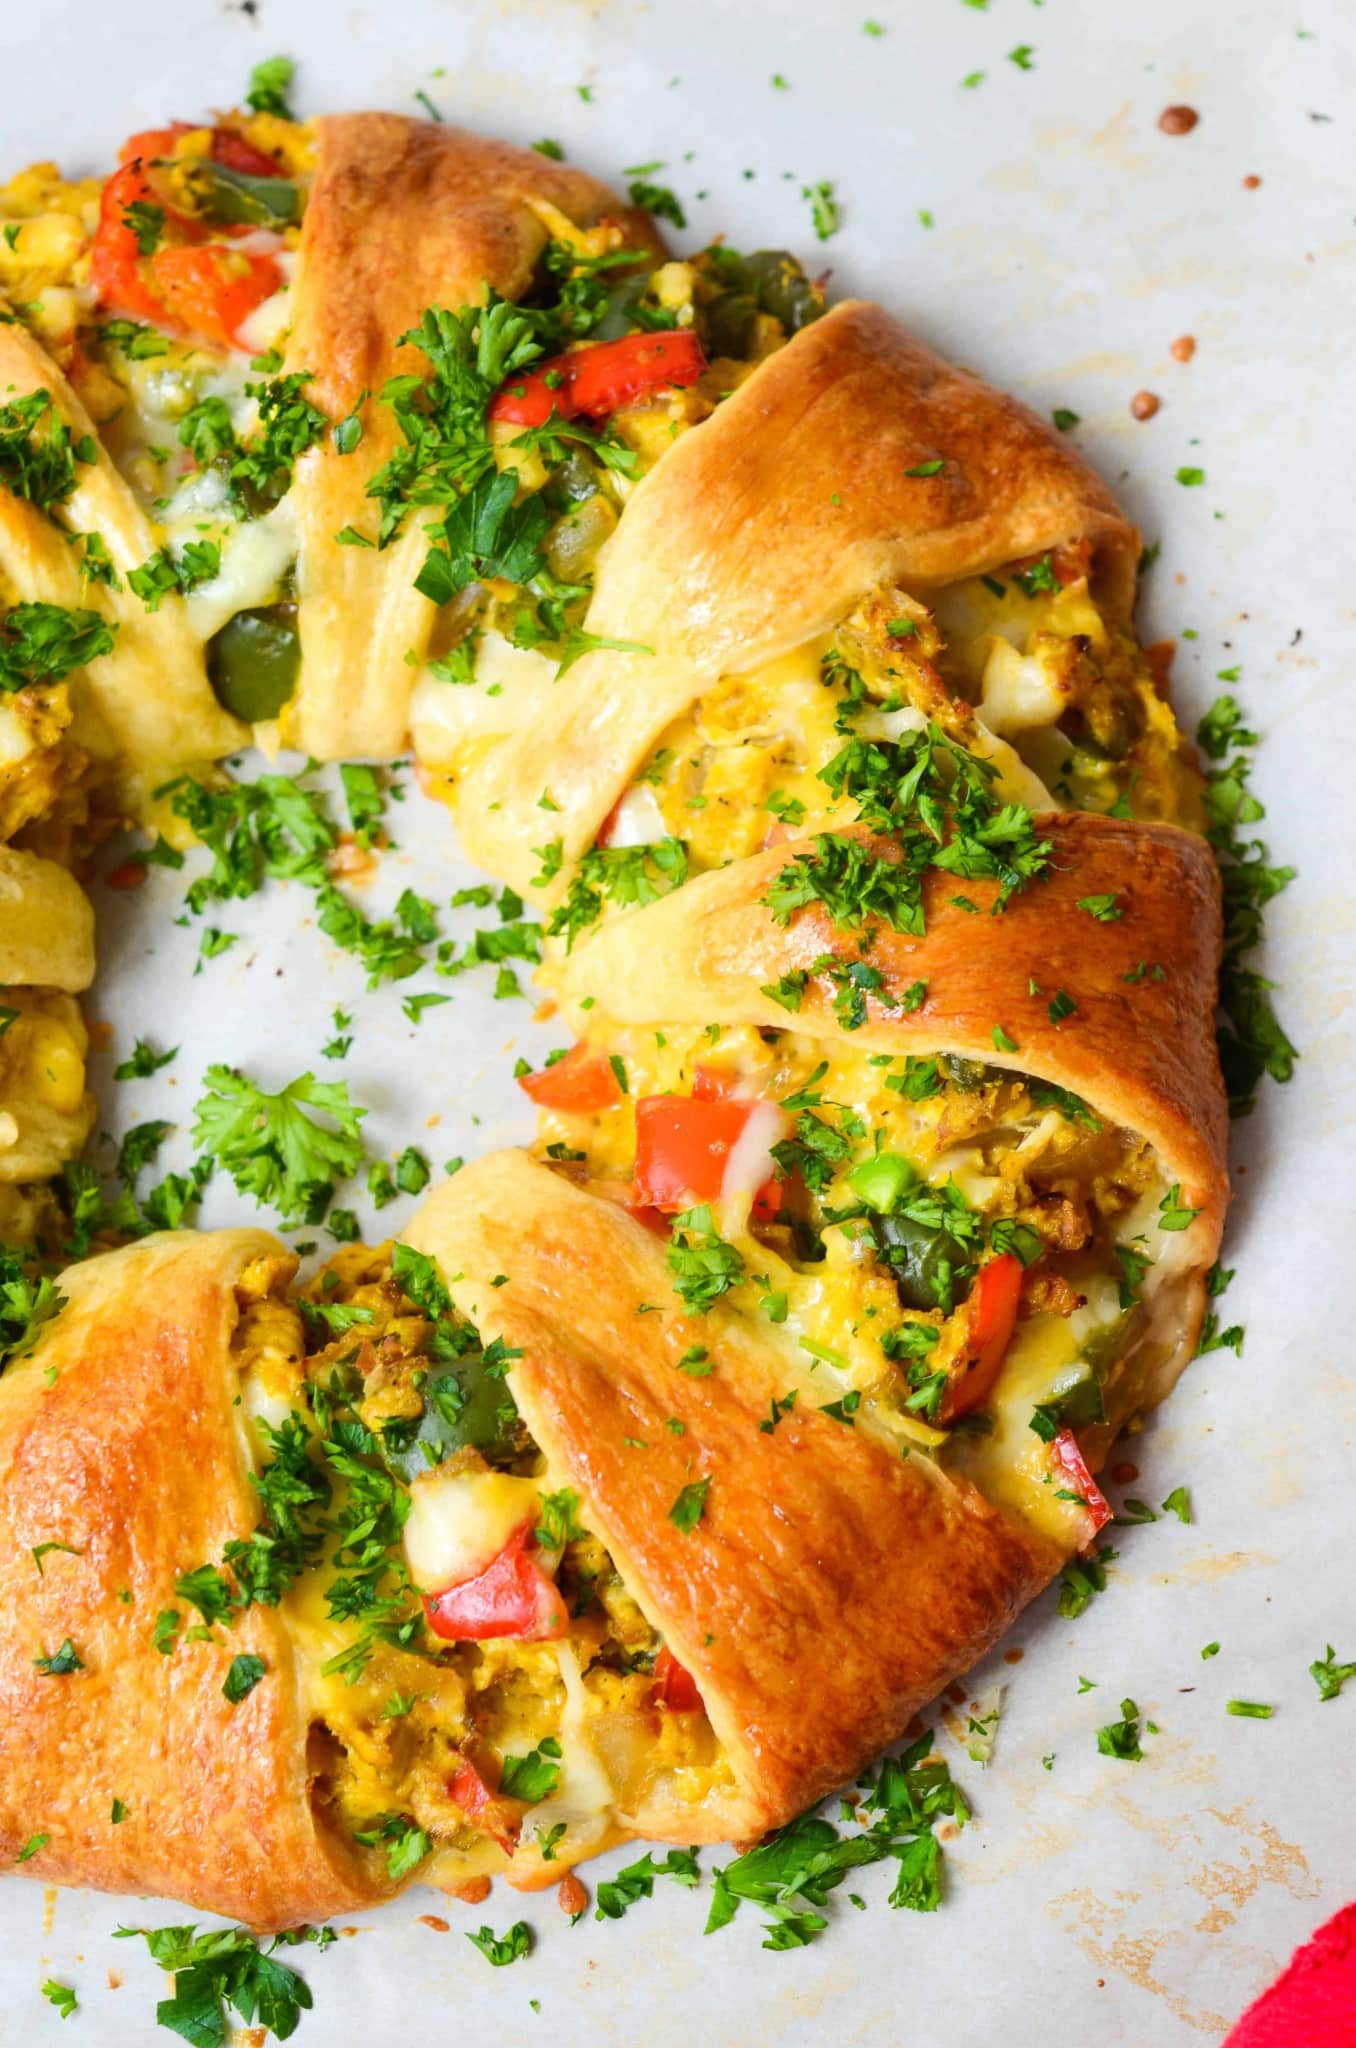 A crescent roll ring with vegetables and herbs on a baking sheet.